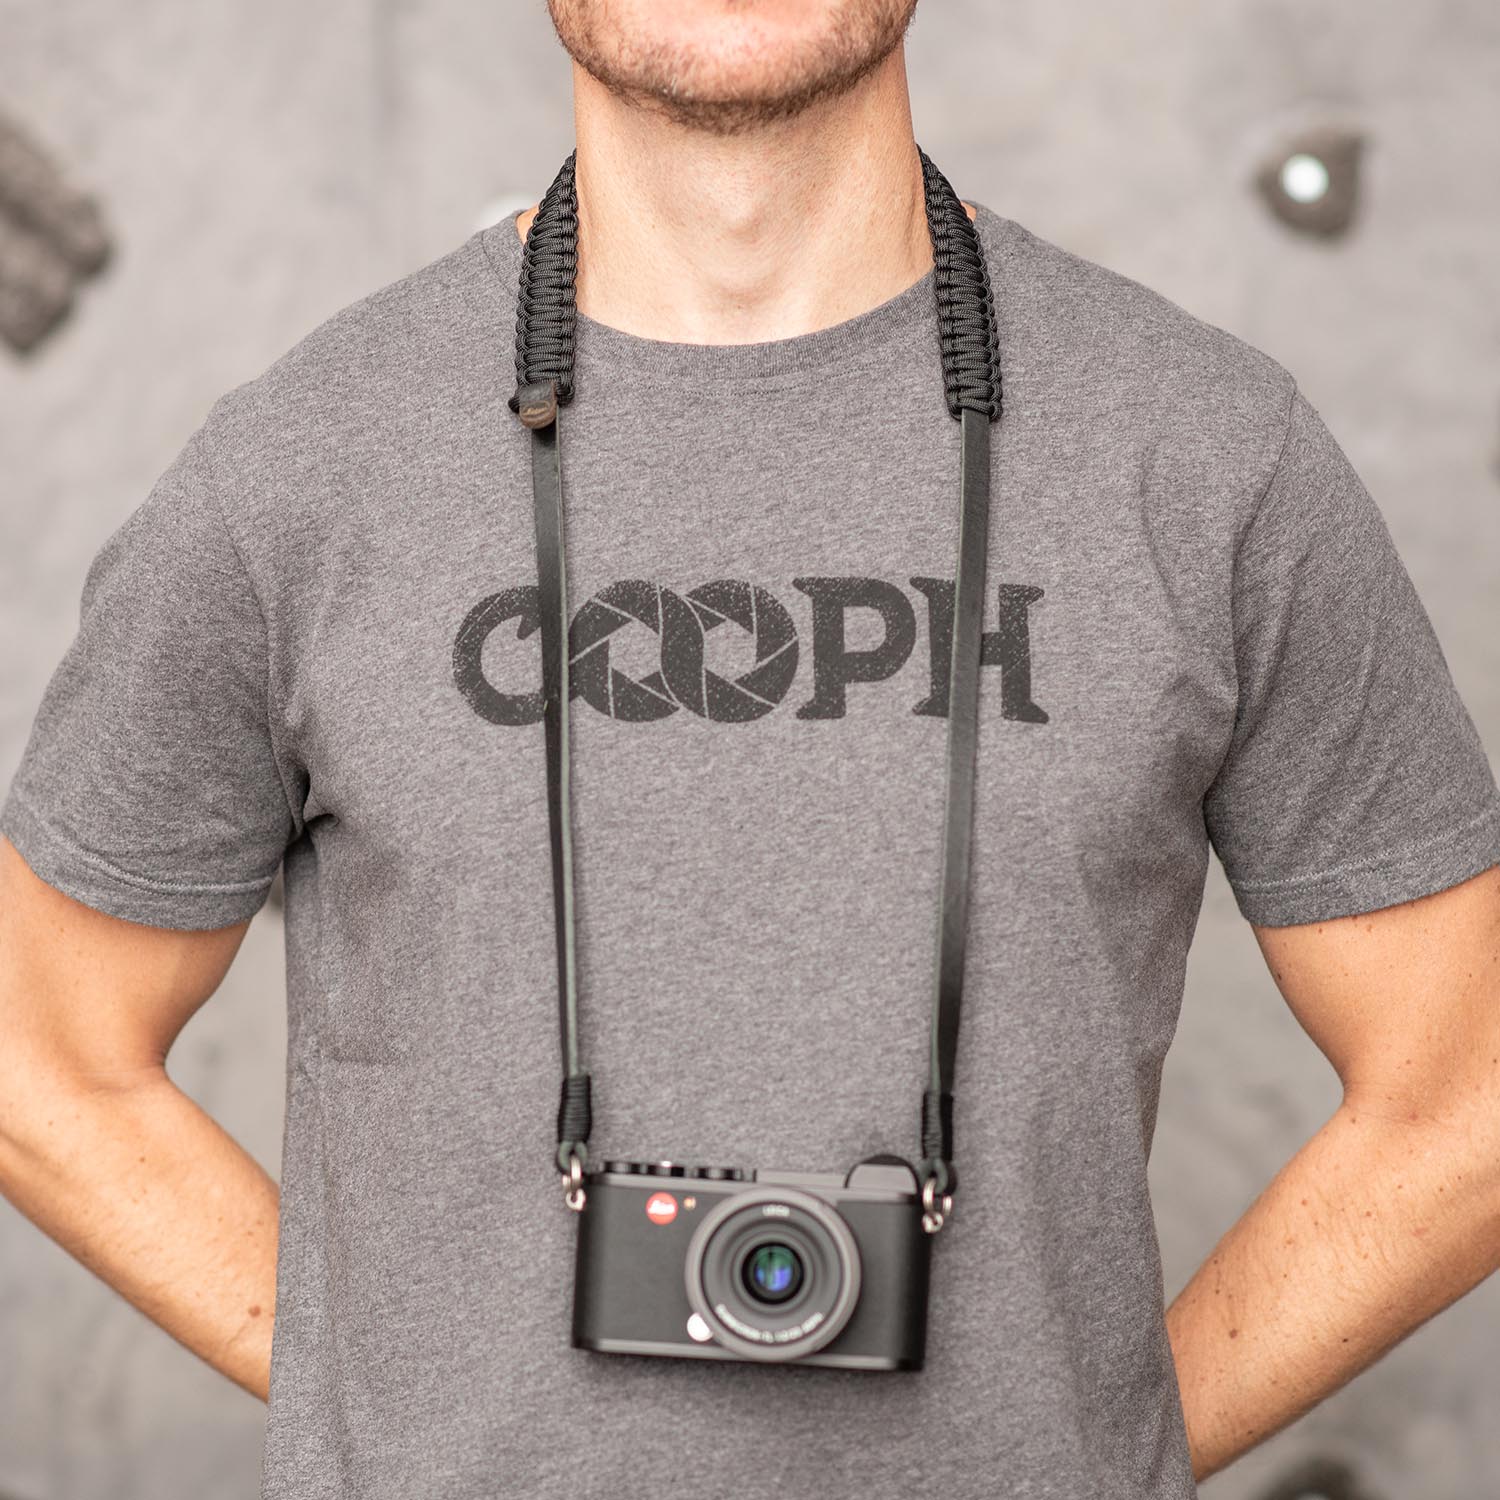 Leica Paracord Strap created by COOPH – COOPH